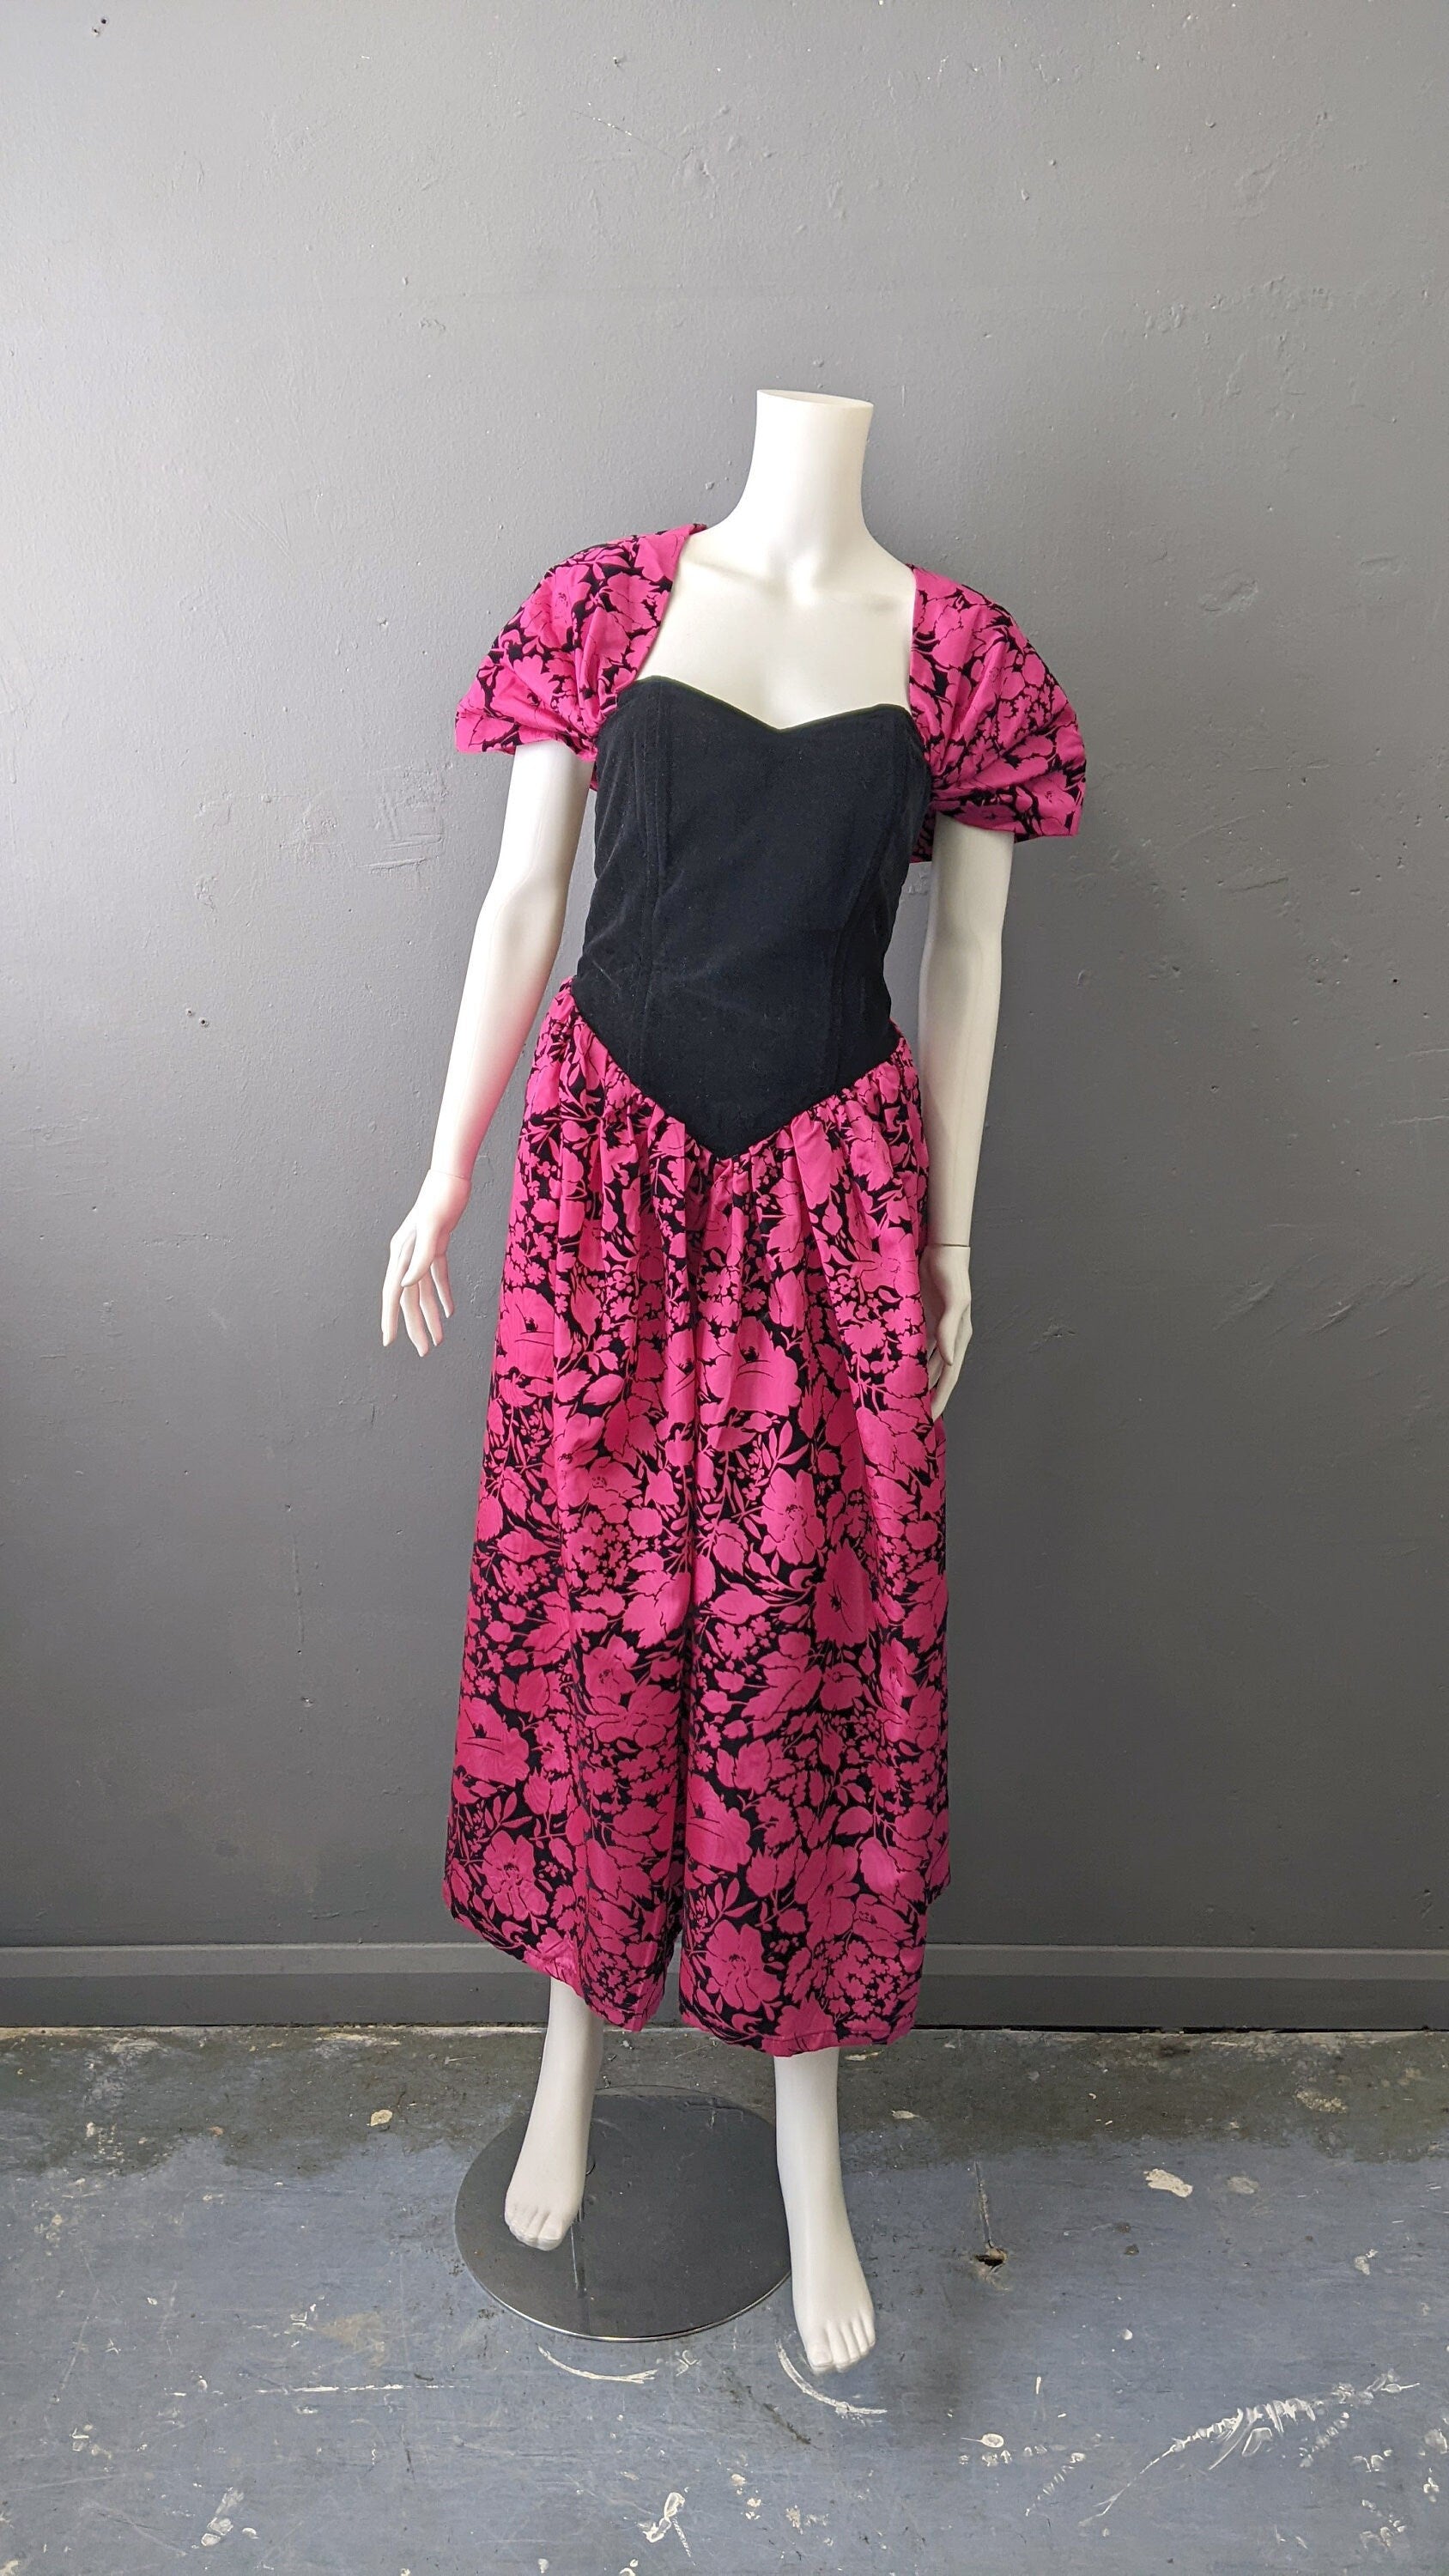 Fuschia 80s Velvet Taffeta Prom Dress by Freds, Eighties Party Outfit, Size Small